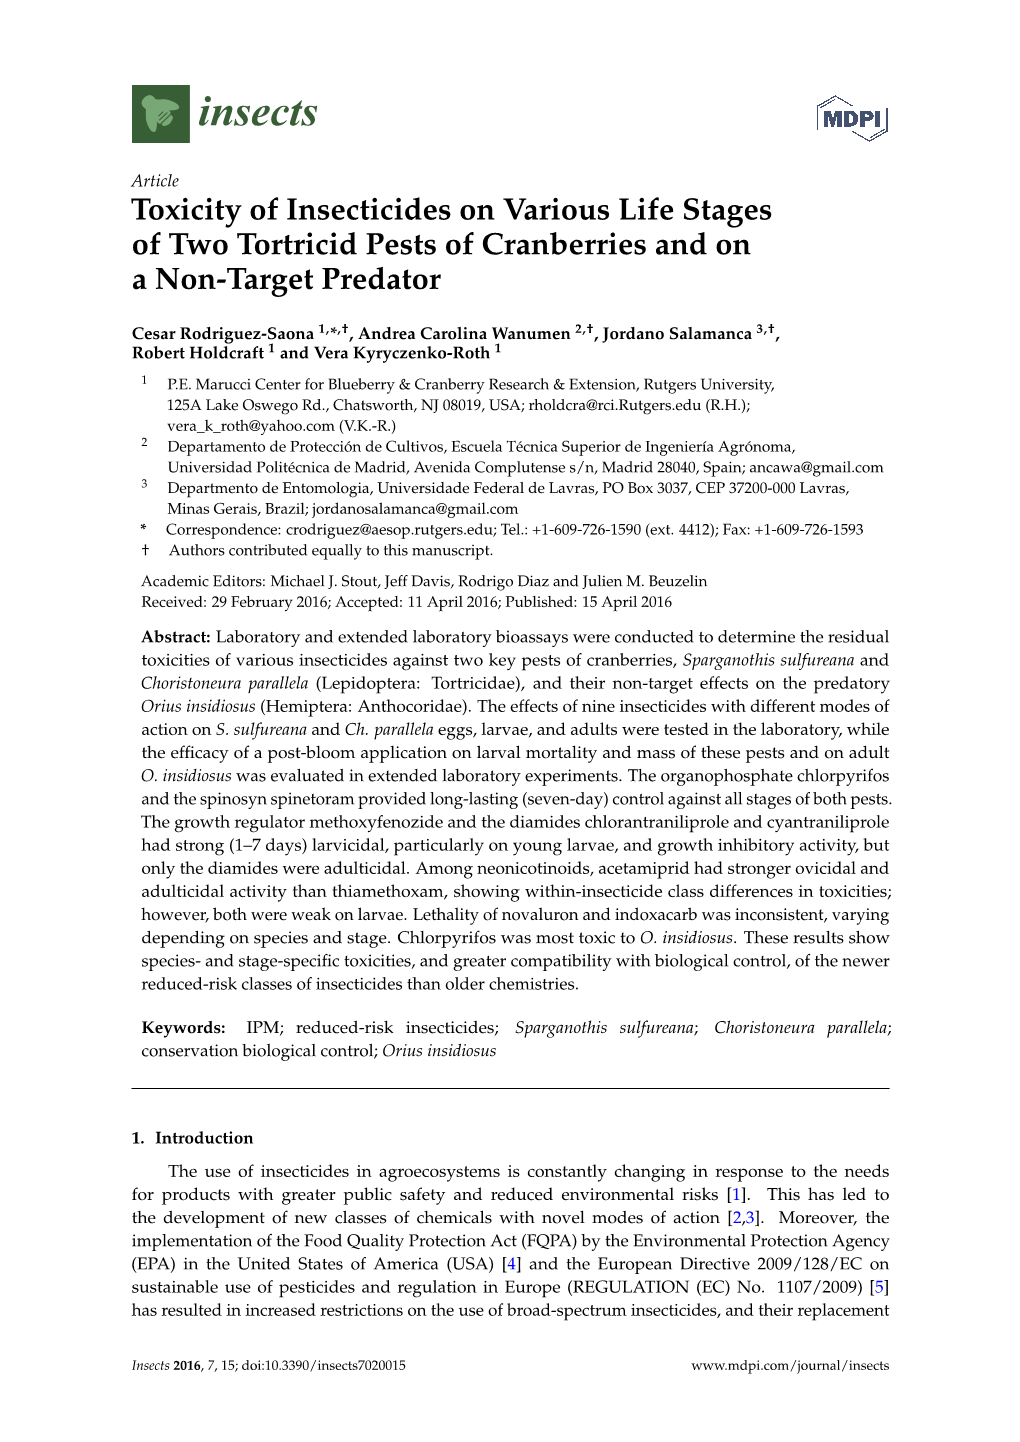 Toxicity of Insecticides on Various Life Stages of Two Tortricid Pests of Cranberries and on a Non-Target Predator